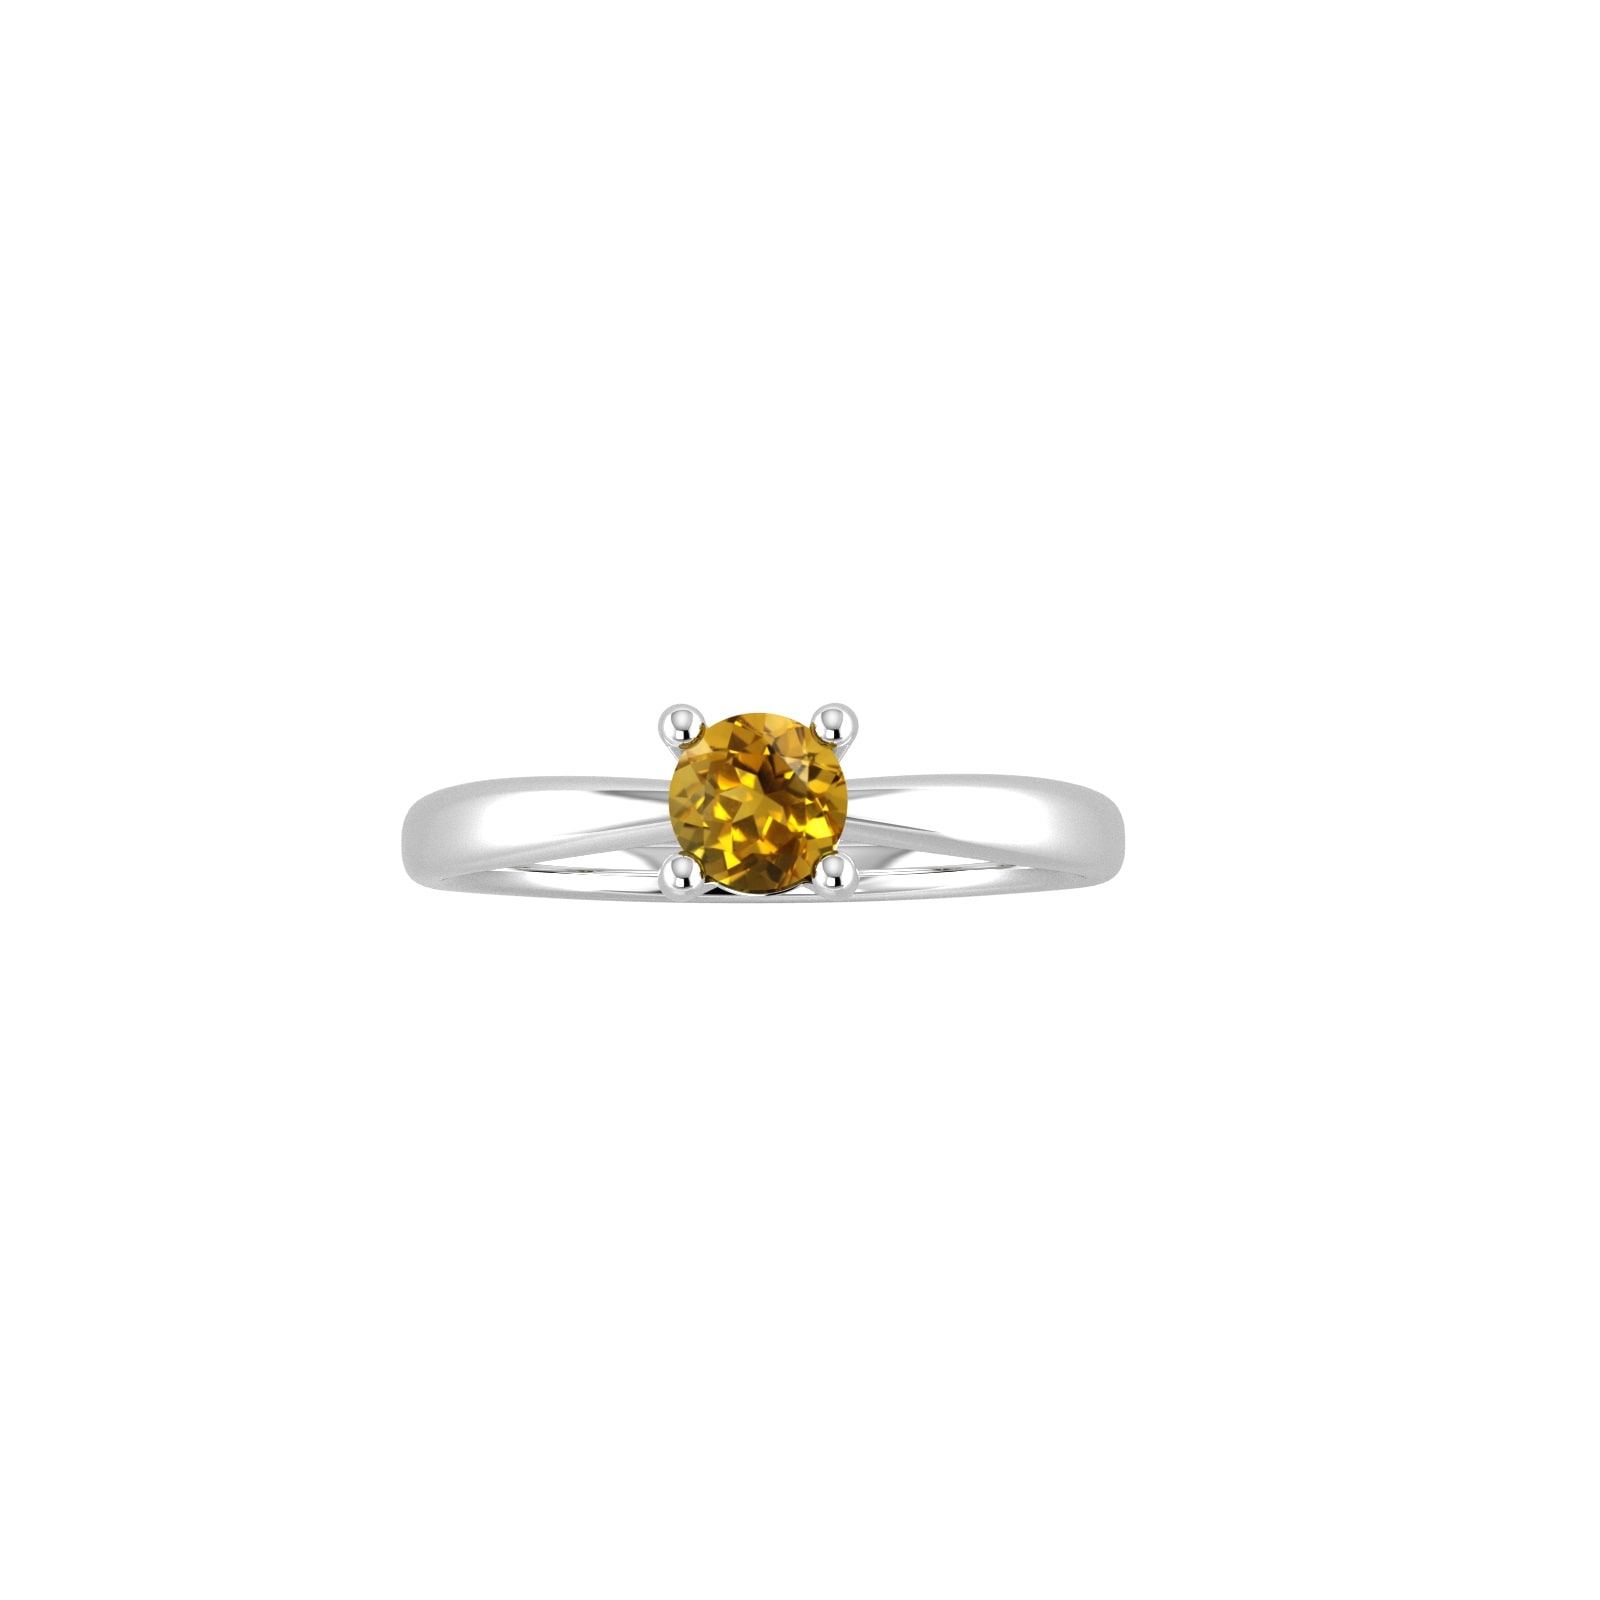 9ct White Gold 4 Claw Citrine Ring